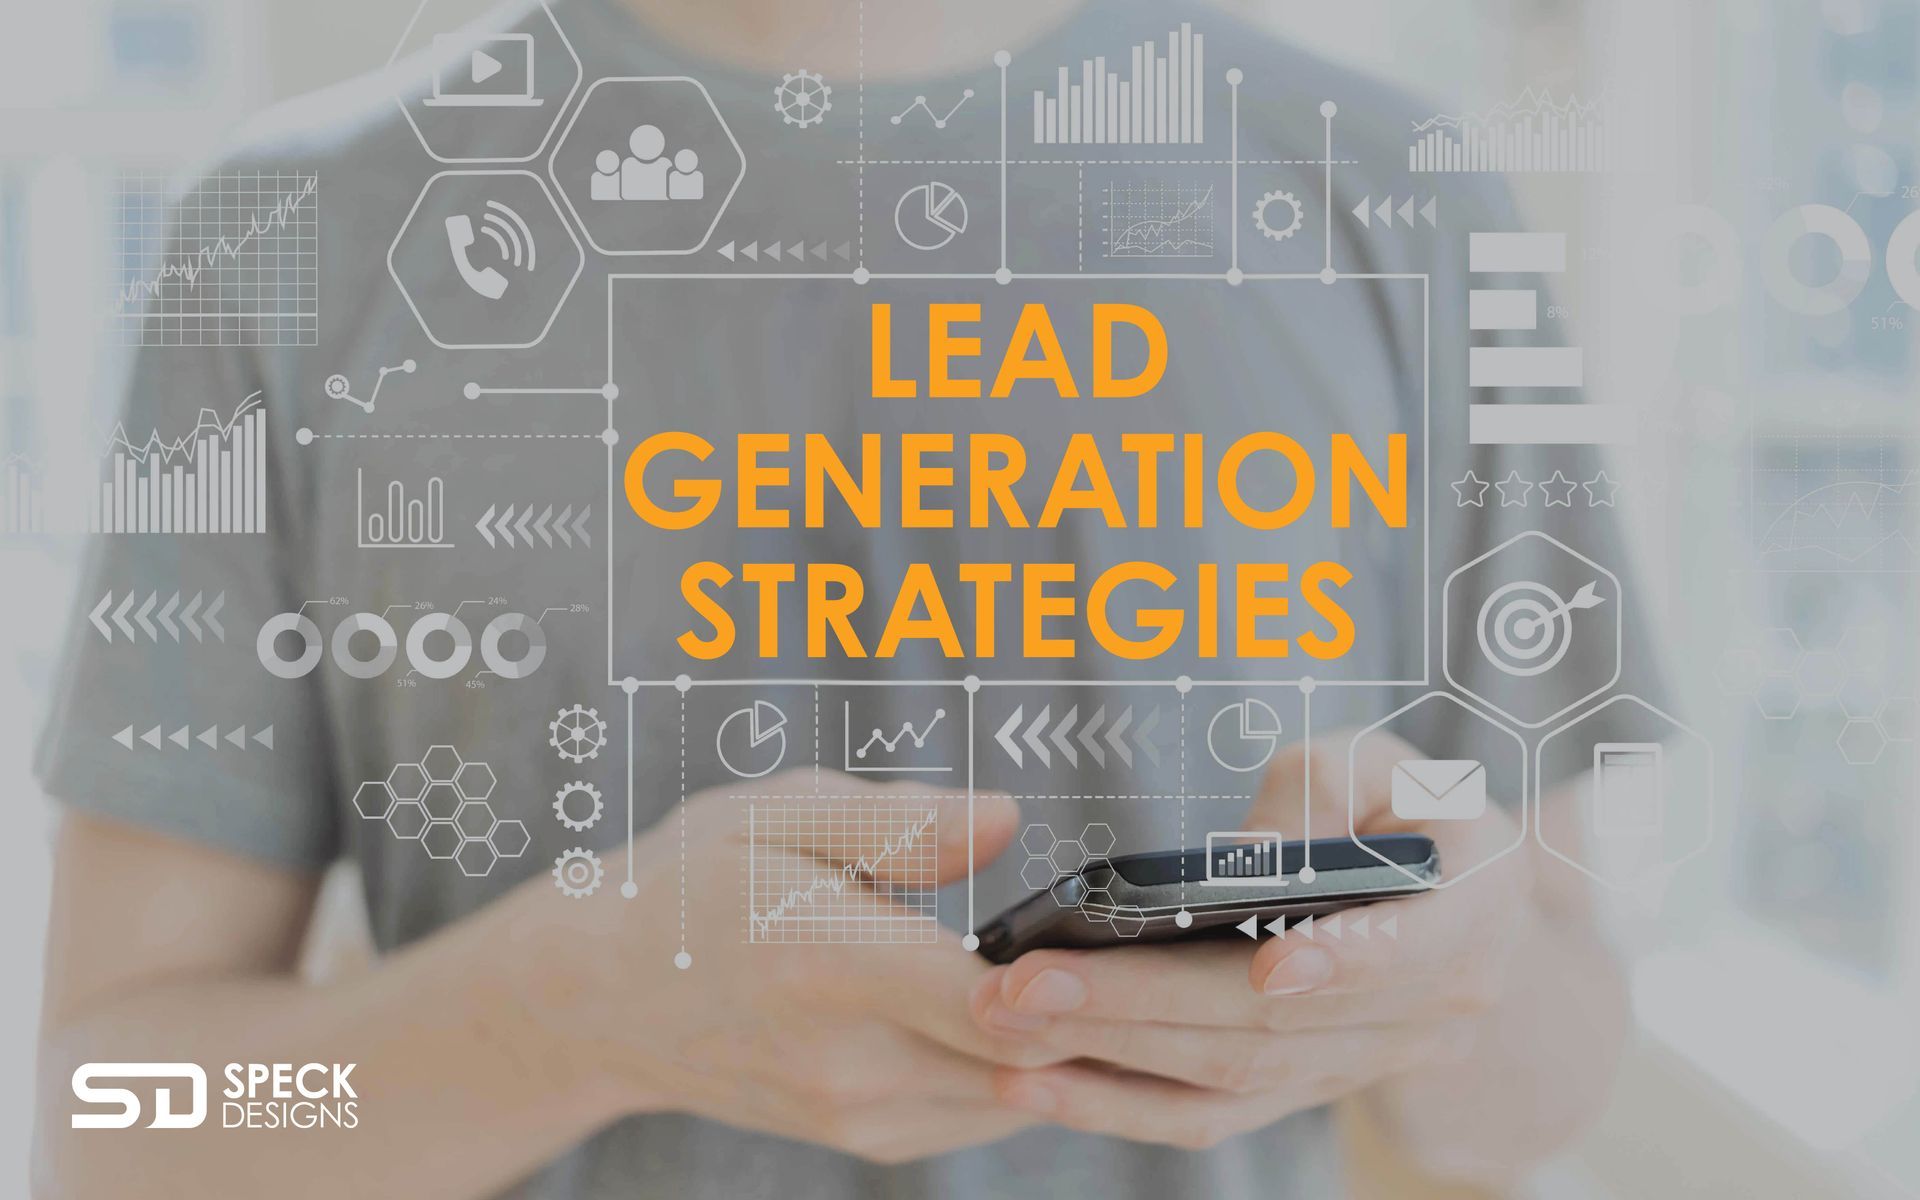 A man is holding a cell phone in his hands and using lead generation strategies.